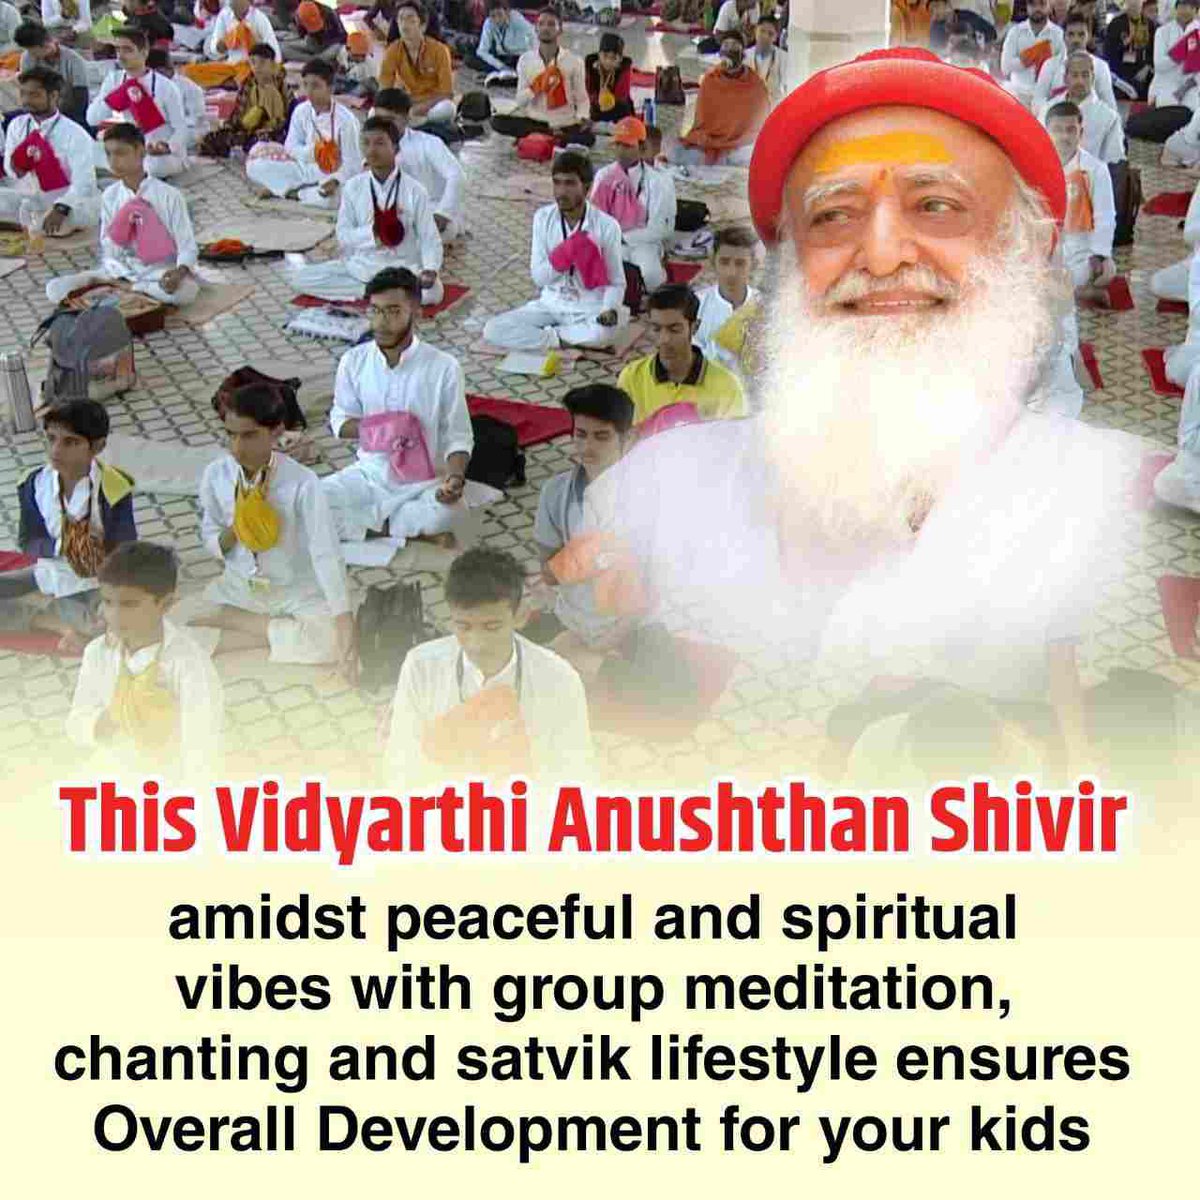 @RajeshMane8 @YogVedantSamiti Yes Sant Shri Asharamji Ashram is well known for its selfless services. This time the organisation is conducting Summer Vacation camp for students. Here kids are taught yog, meditation, and other techniques for their Spiritual and Mental Growth
#NurturingLittleMinds